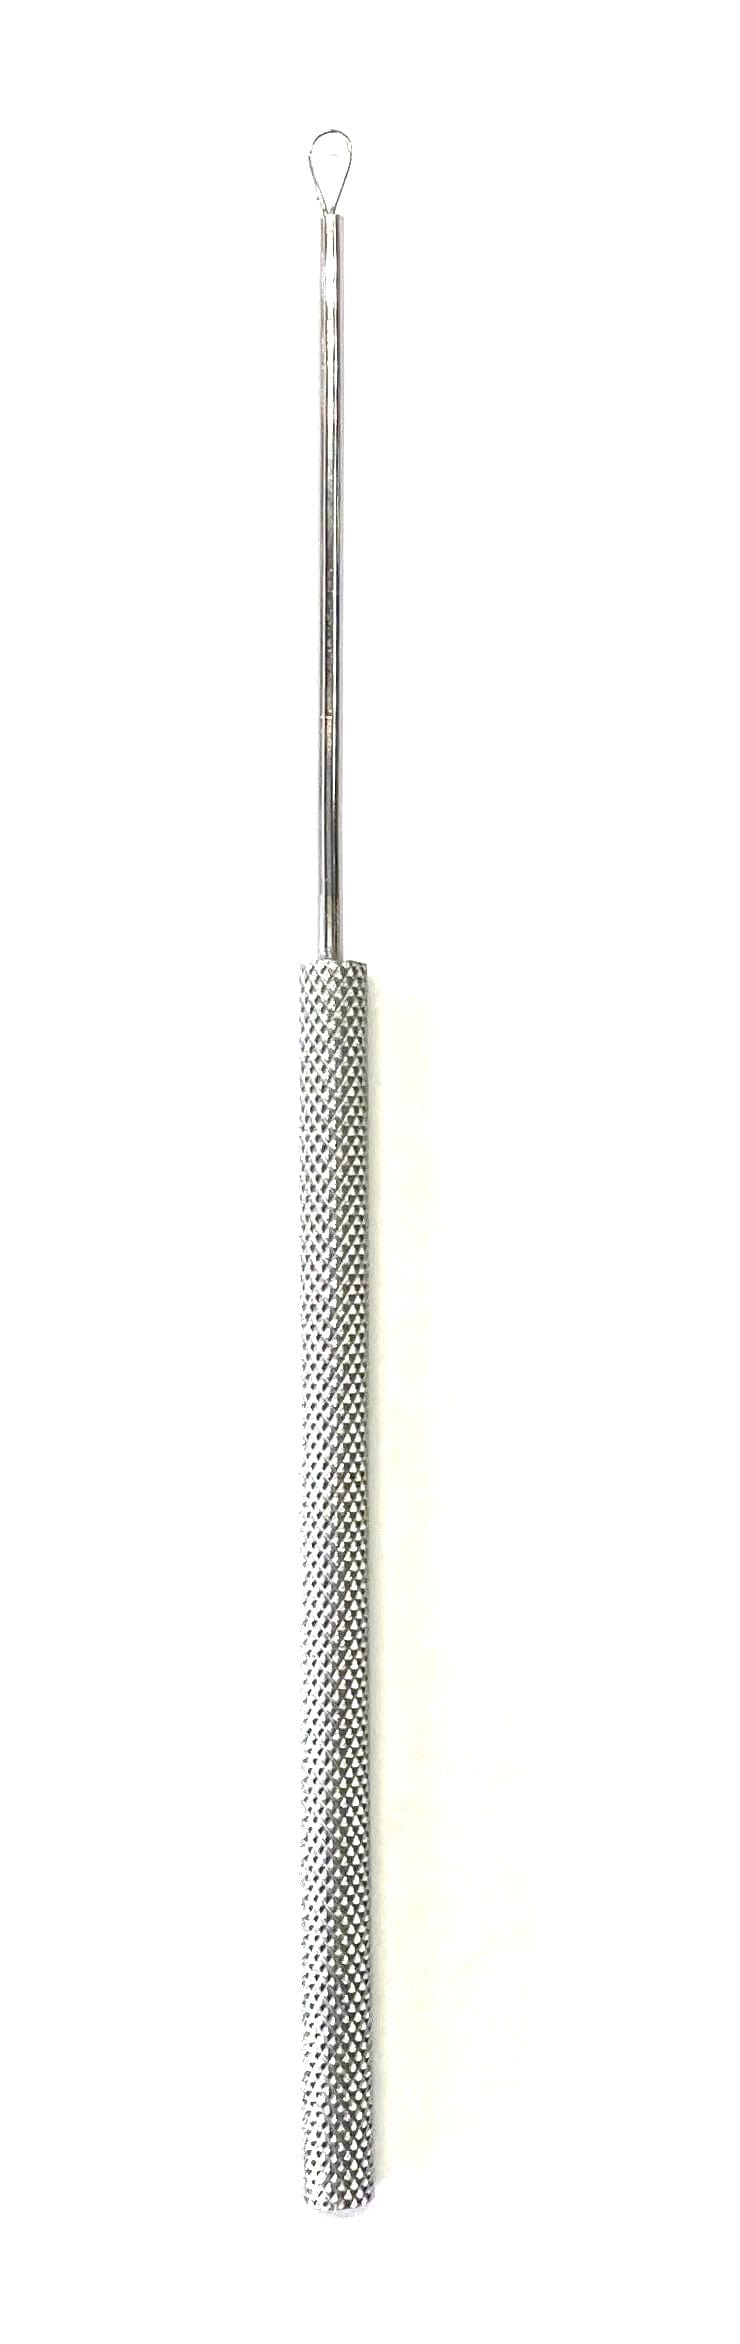 Comedone Extractor & Blackhead #287RF 6" Stainless Steel Skin Care Tools